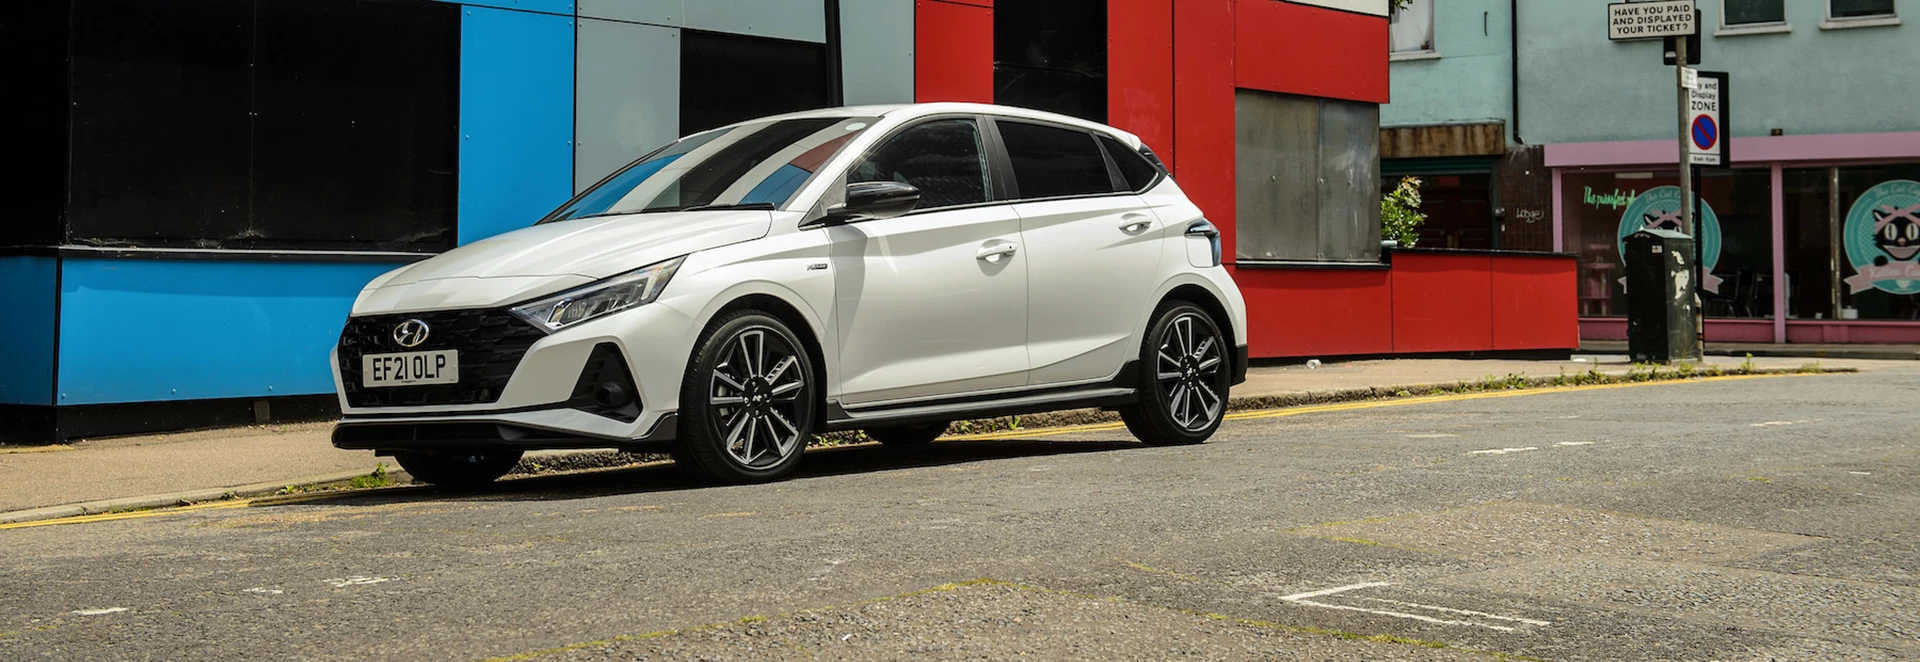 5 reasons why the Hyundai i20 is a great supermini 